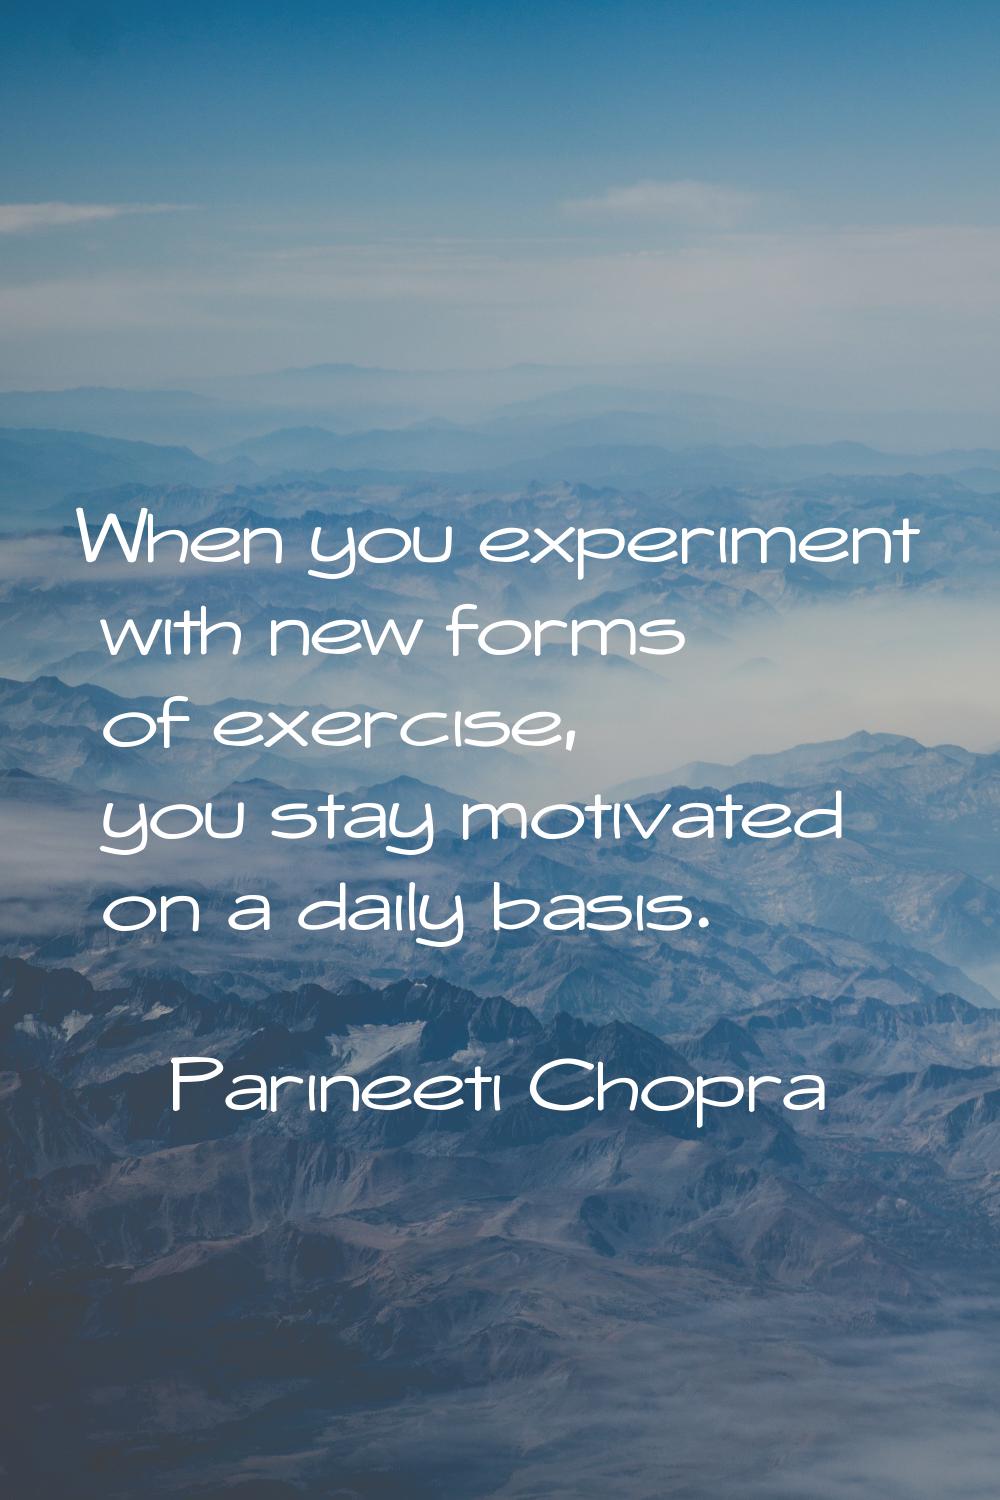 When you experiment with new forms of exercise, you stay motivated on a daily basis.